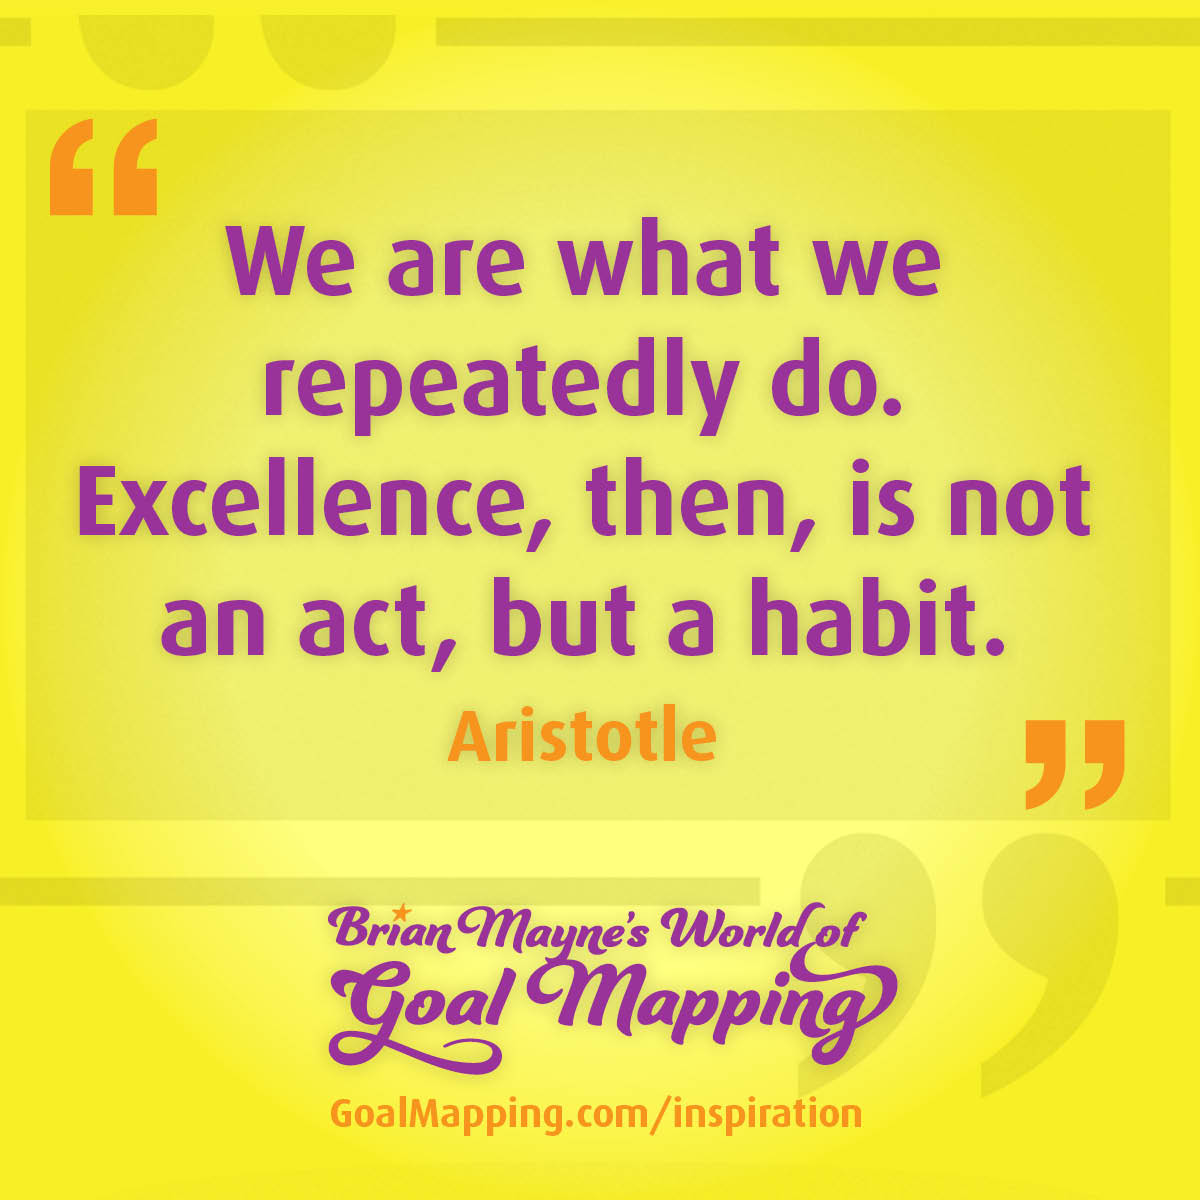 "We are what we repeatedly do. Excellence, then, is not an act, but a habit." Aristotle